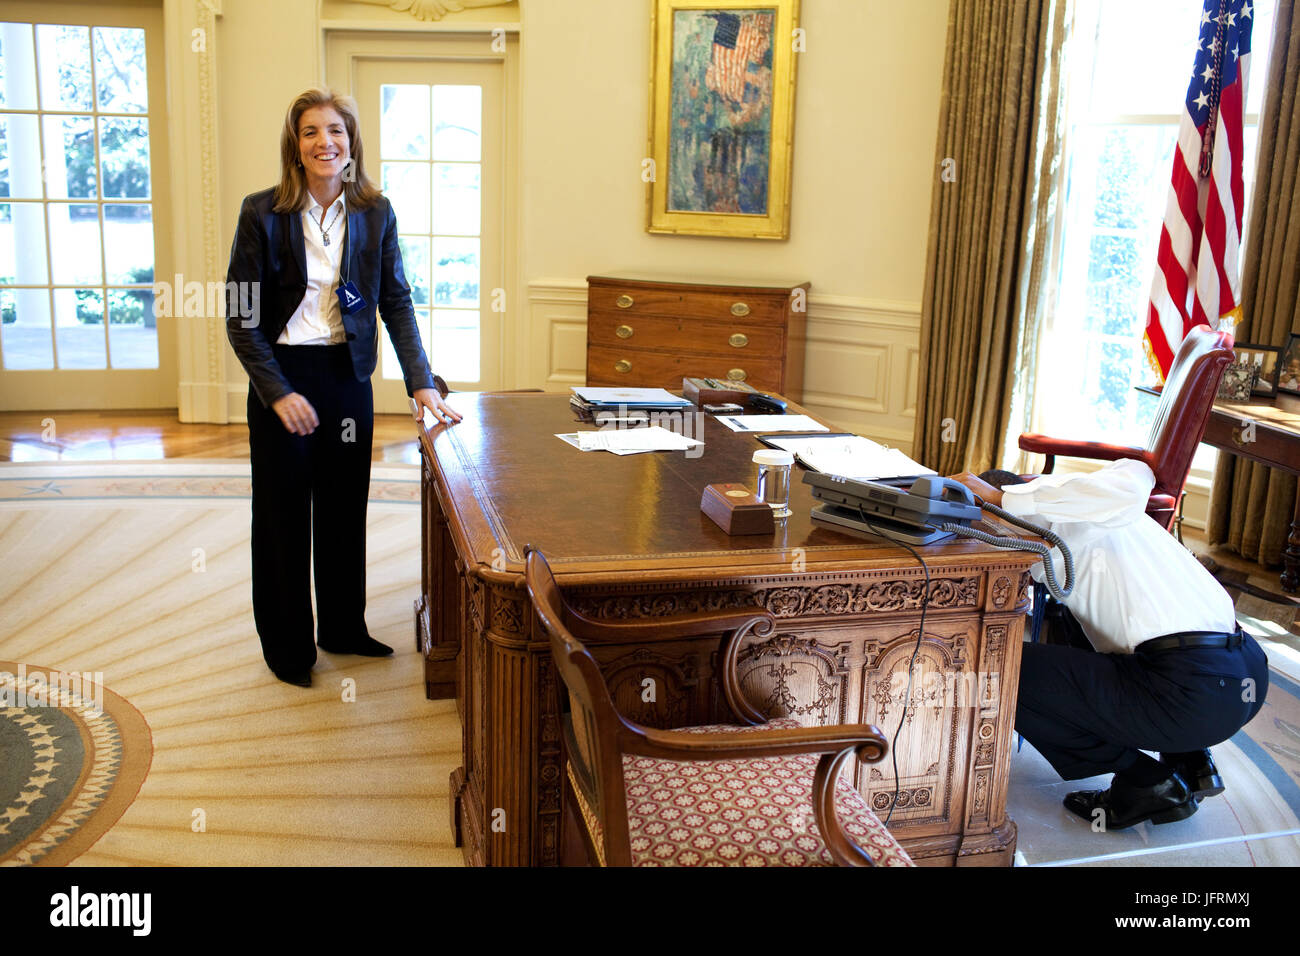 President Barack Obama examines  the Resolute Desk on March 3, 2009, while visiting with Caroline Kennedy Schlossberg in the Oval Office. In a famous photograph, her brother John F. Kennedy Jr., peeked through the FDR panel, while his father President Kennedy worked.  Official White House Photo by Pete Souza Stock Photo